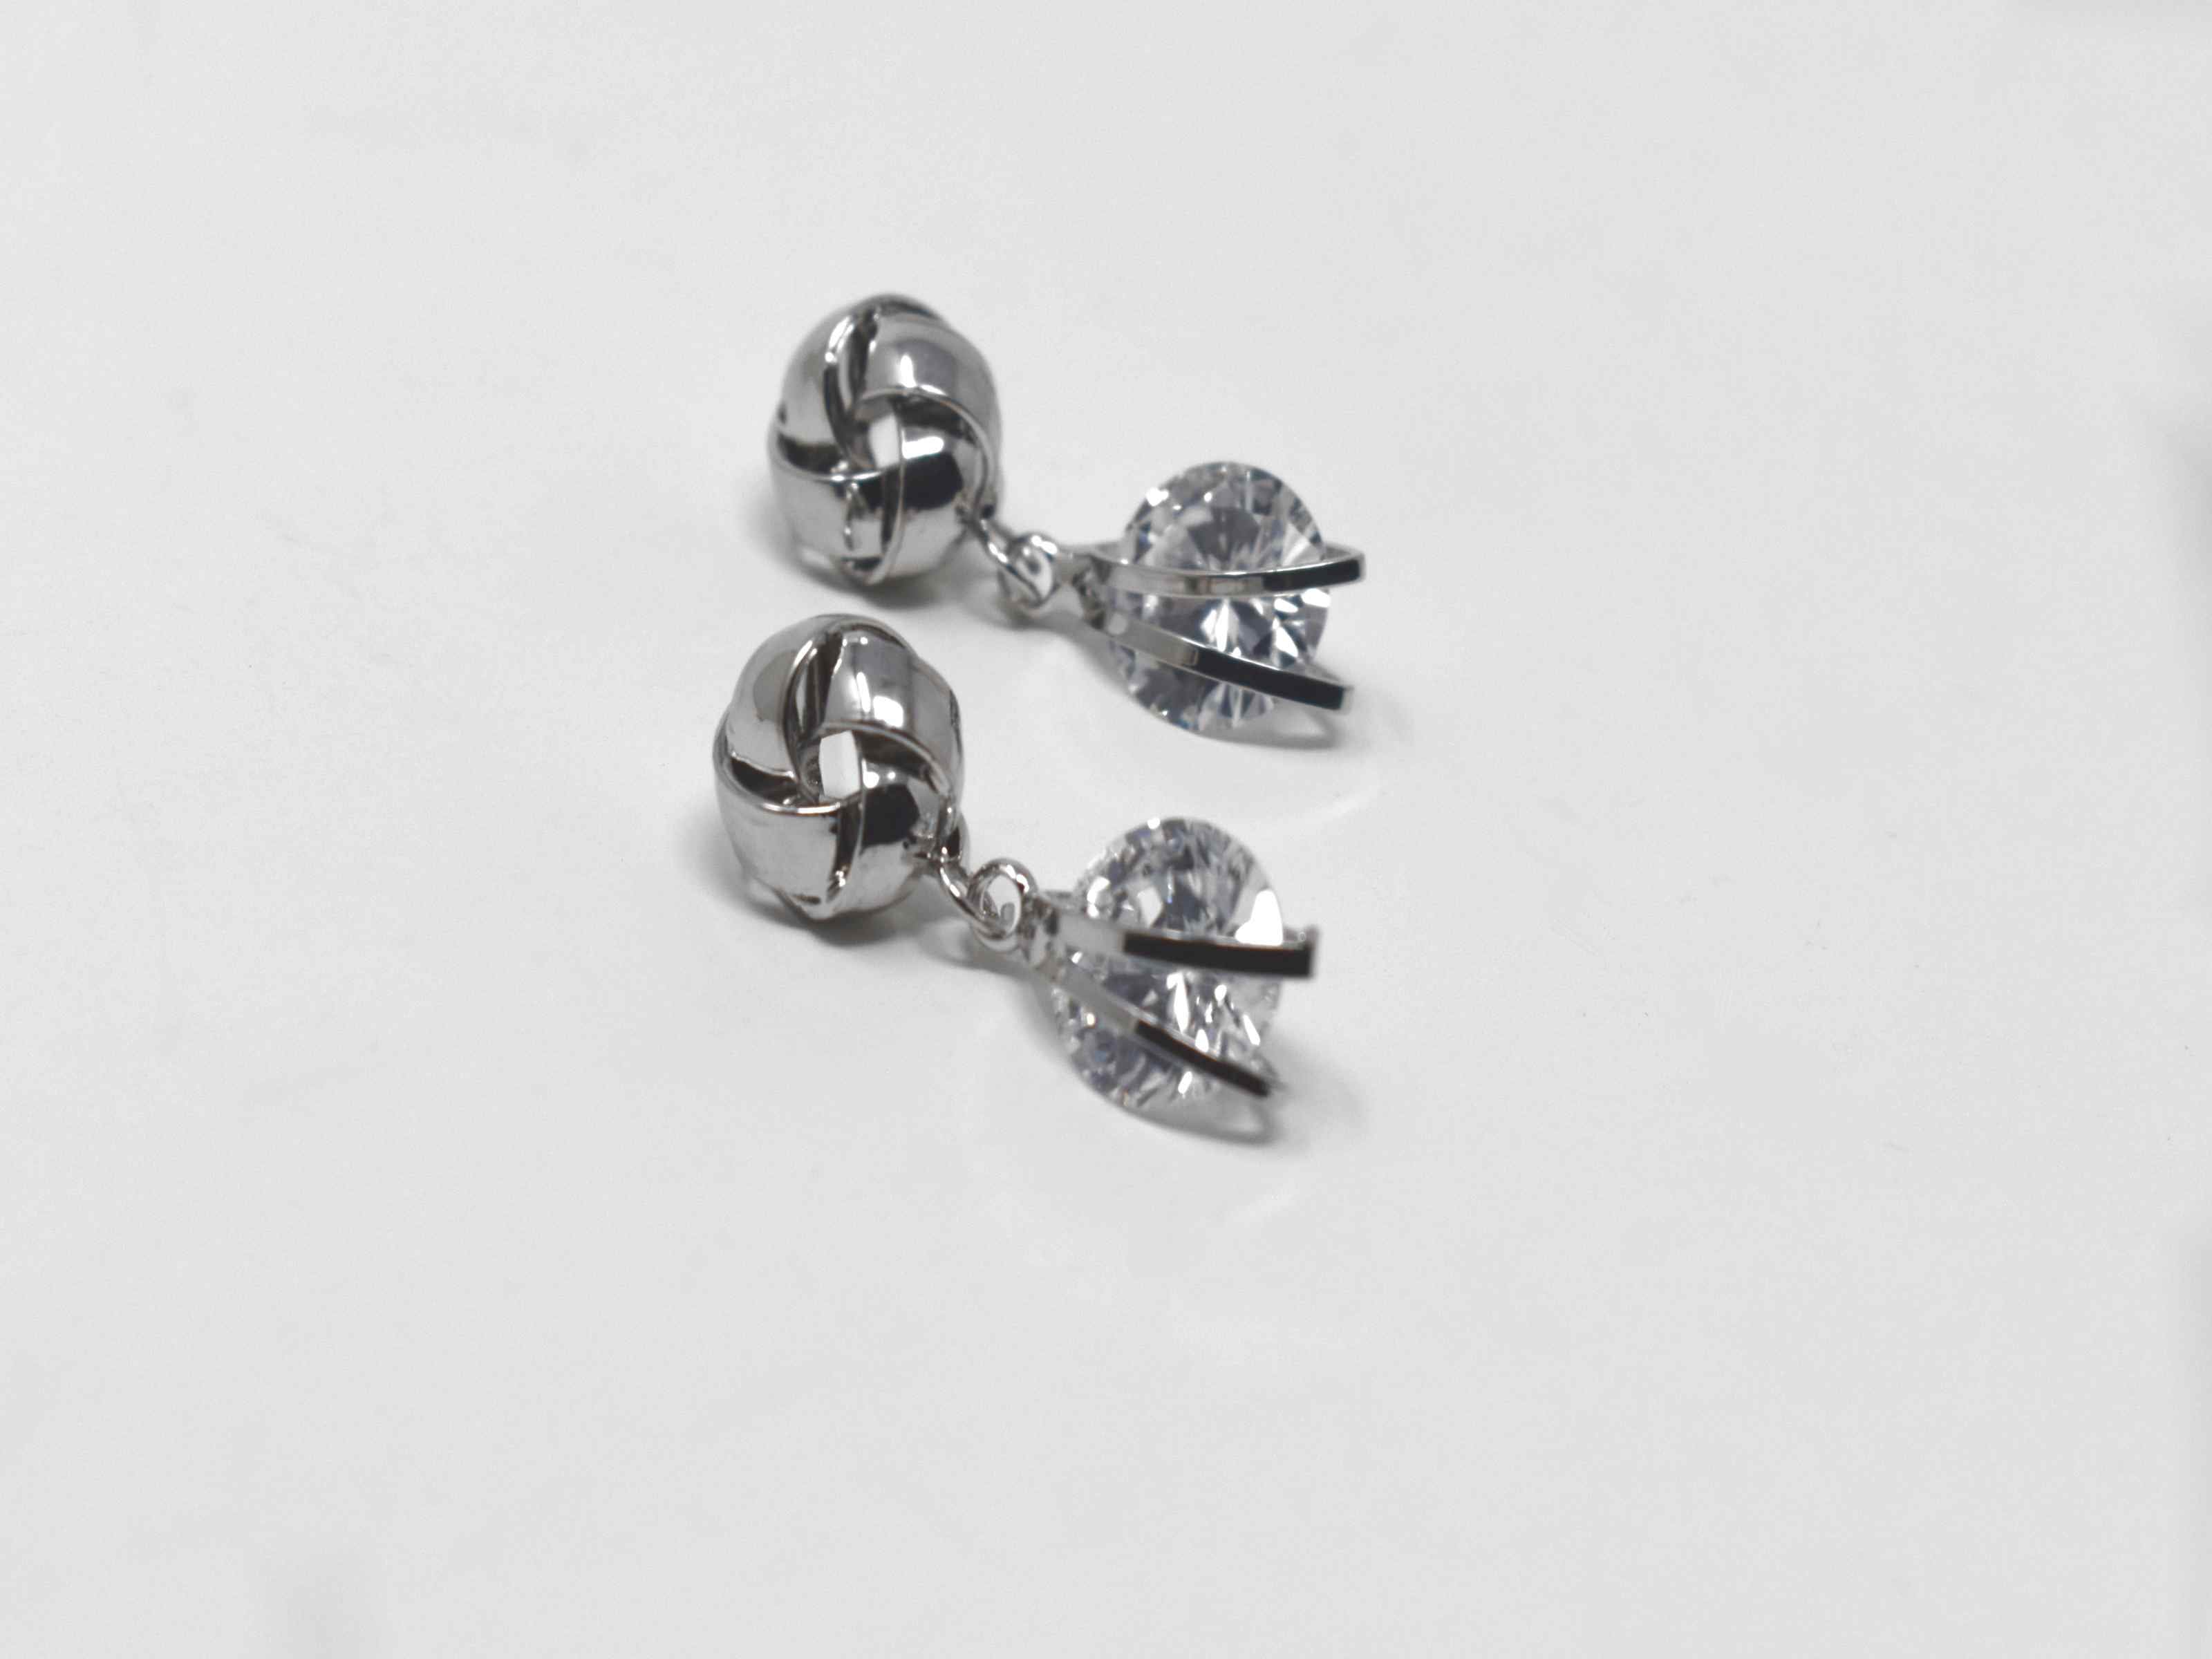 Our Erica earrings are so delicate and chic! These little silver beauties are the perfect knob chandelier earrings with a knot design and a drop dangle stone. It has a push back clasp and is 1 inch in length.